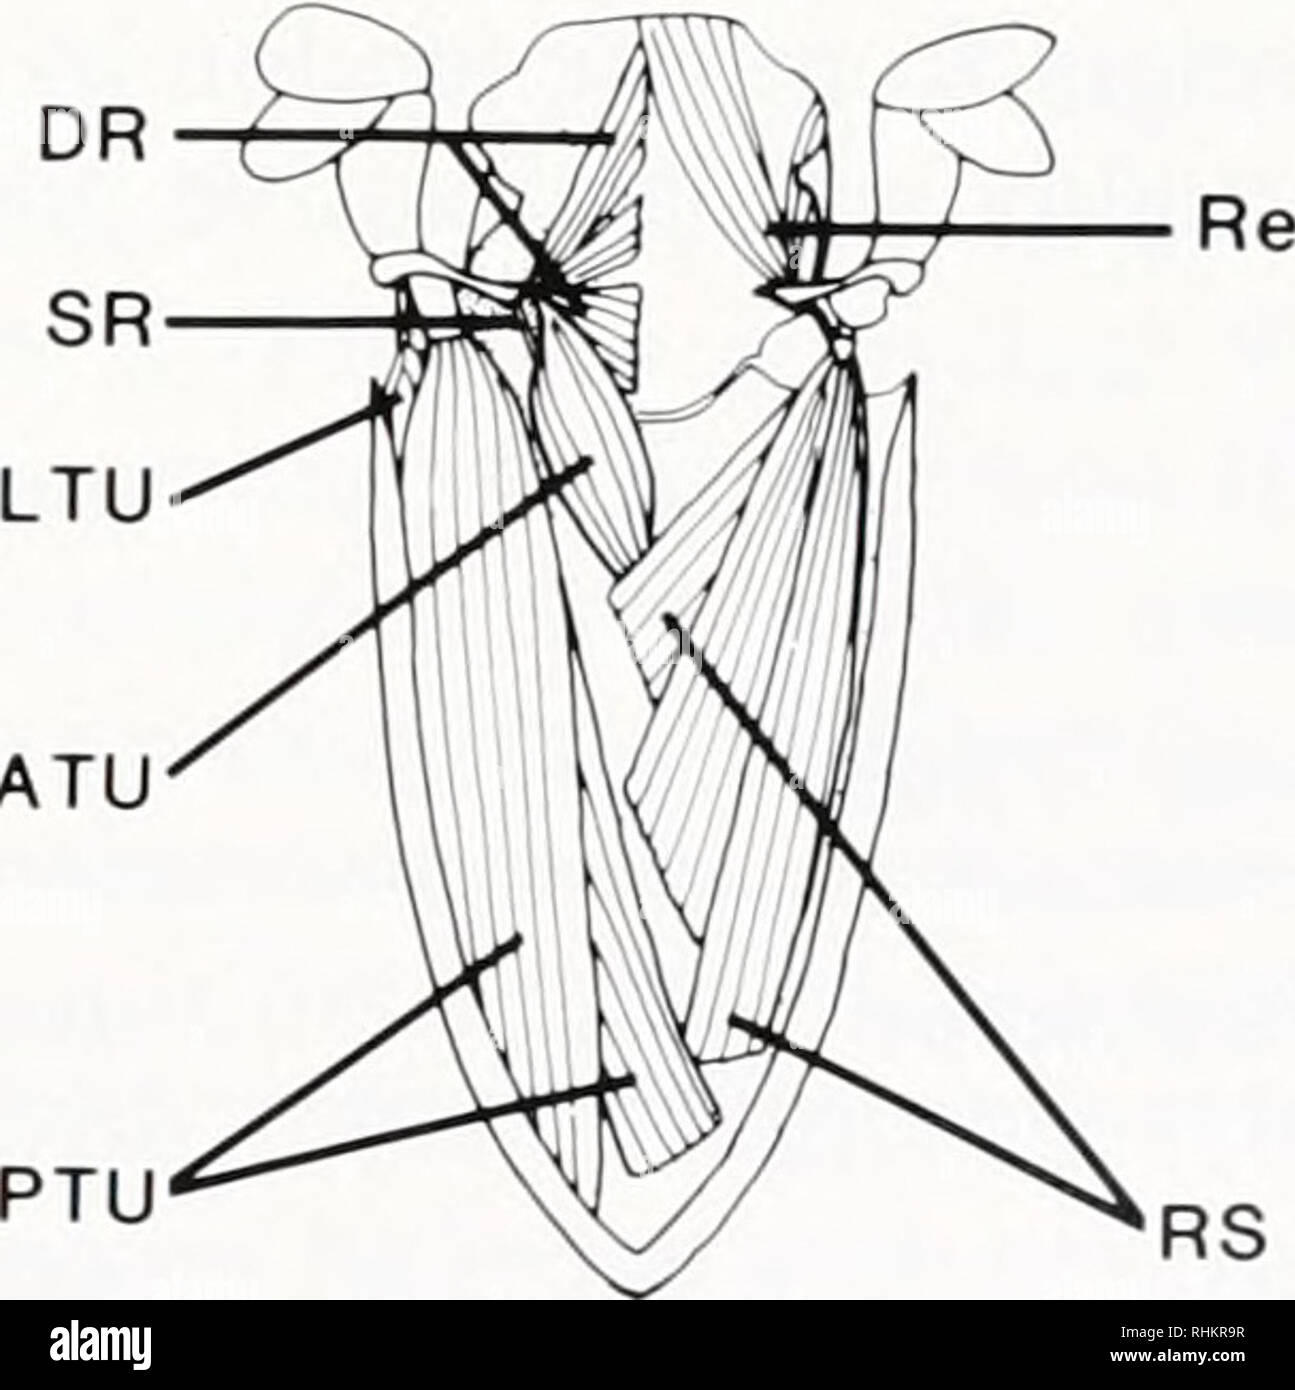 . The Biological bulletin. Biology; Zoology; Biology; Marine Biology. C2. ATU PTU RS FIGURE 3. Anomurans: ventral aspects of sixth abdominal segment and tailfan to show muscles in telson and segment 6 of A, Munida, B, Blepharipoda, C, Emerita. Layout, scale, and abbreviations the same as for Figure I. (B. C modified from Paul. 198Ib). The dorsal surface of the telson of Munida is composed of plates separated by unscleratized arthrodial membrane. Two heads of the PTF muscle arise from the caudal plate. The stretch receptors (SR) in A and B are shown in their correct position but actually would  Stock Photo